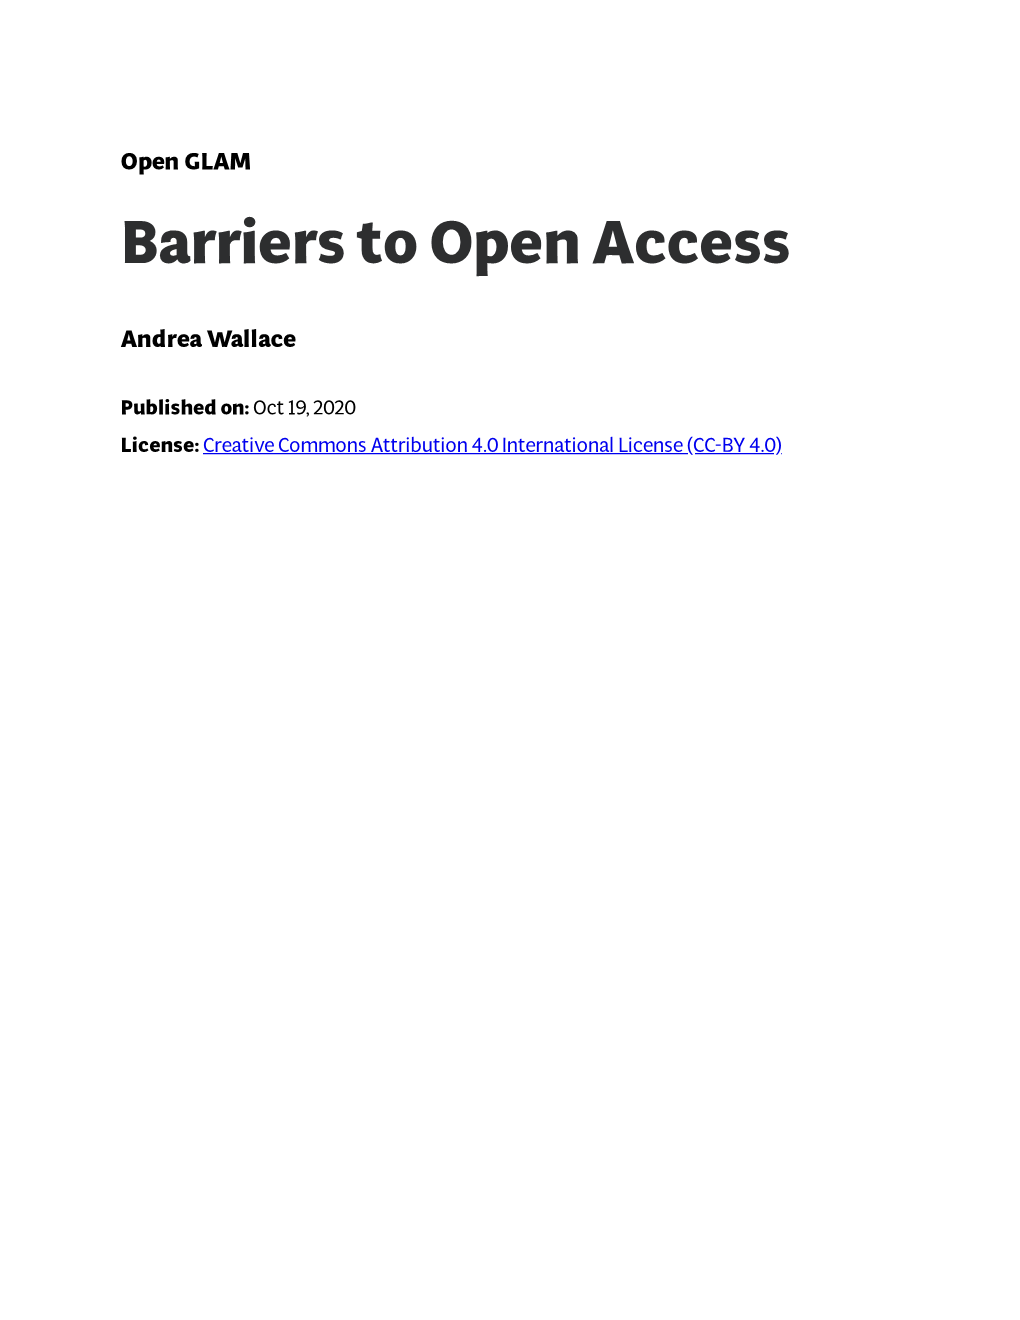 Barriers to Open Access